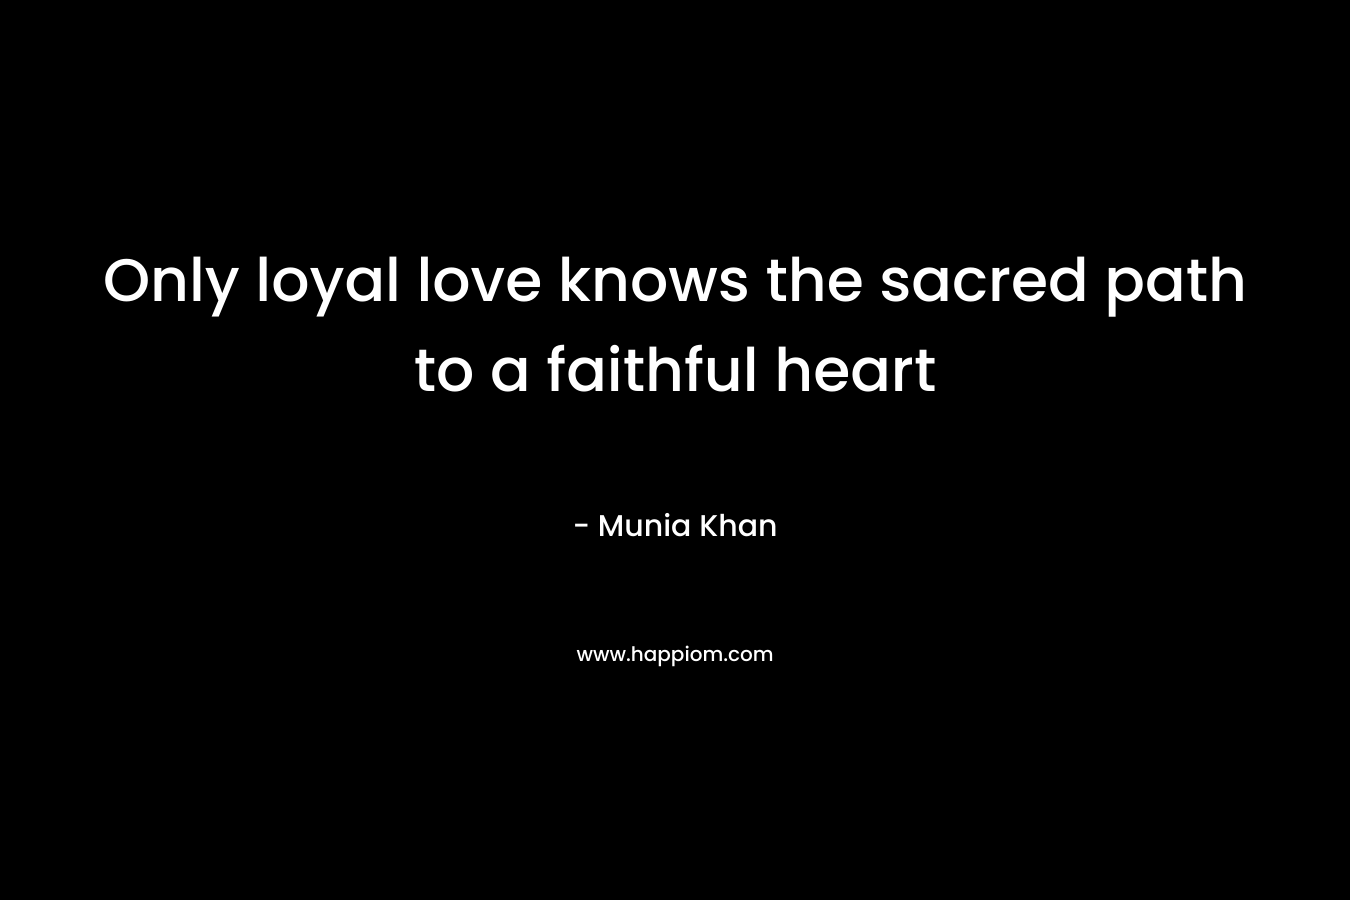 Only loyal love knows the sacred path to a faithful heart